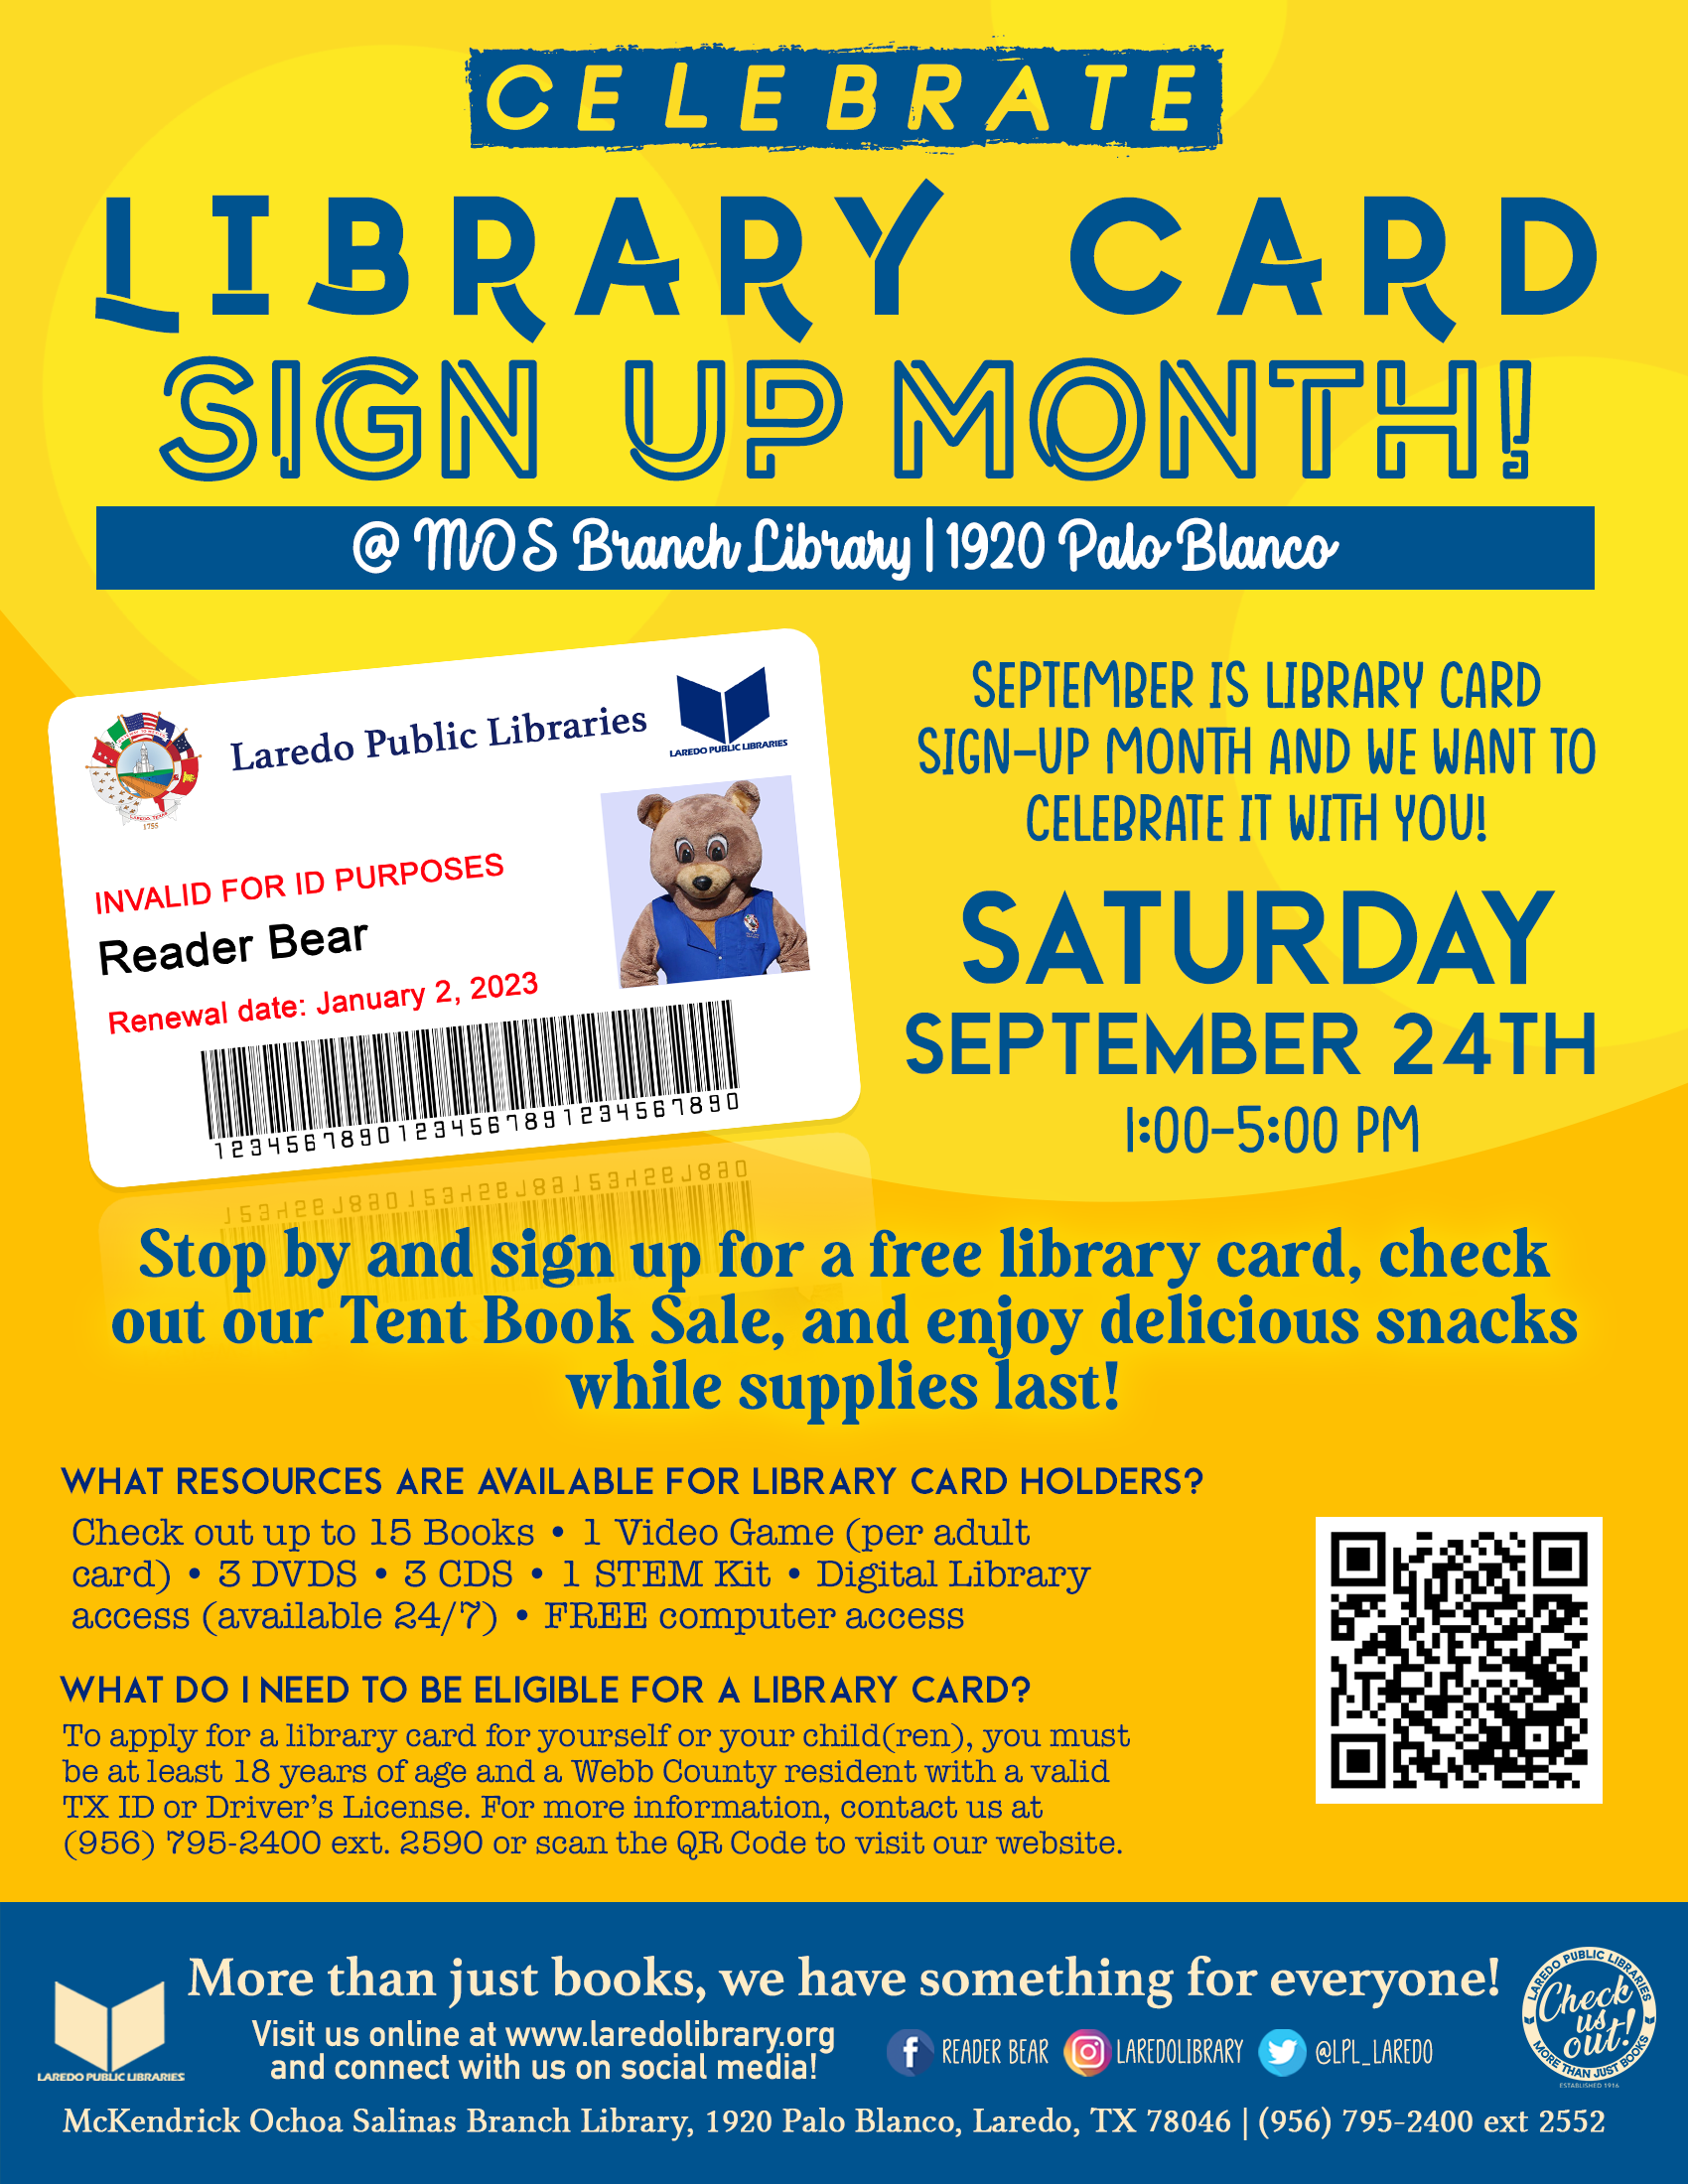 MOS Library Card Sign up Month